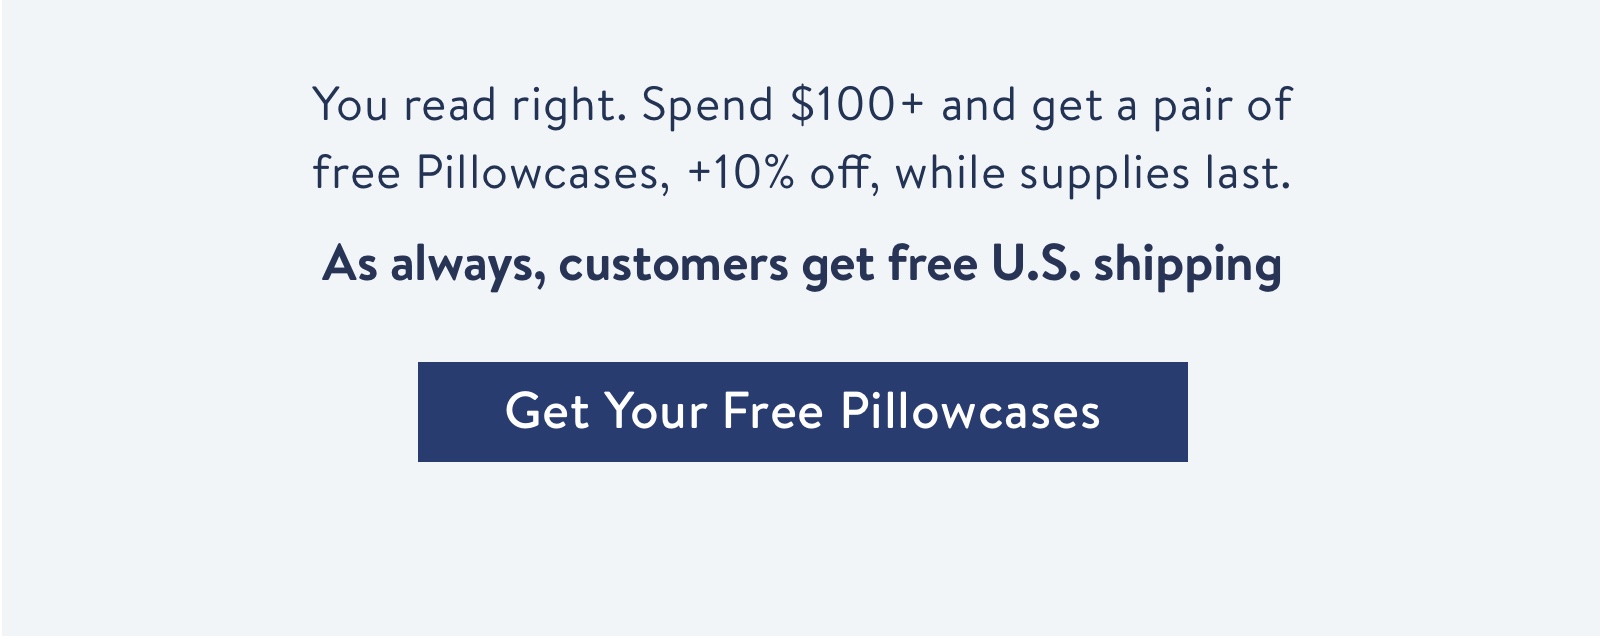 You read right. Spend $100+ and get a pair of  free Pillowcases, +10% off, while supplies last.